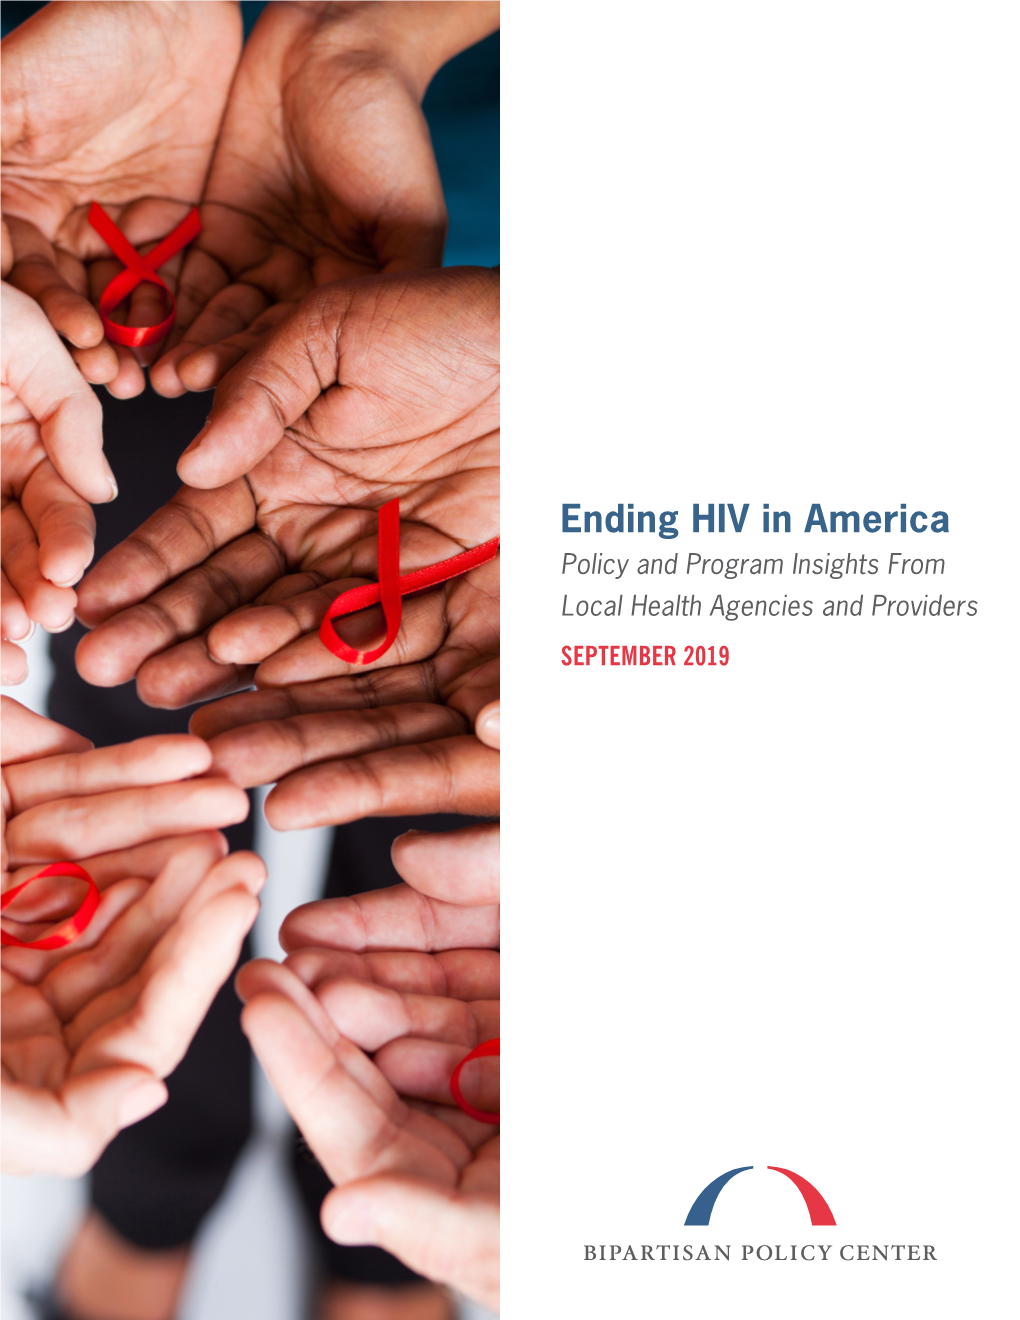 Ending HIV in America: Policy and Program Insights from Local Health